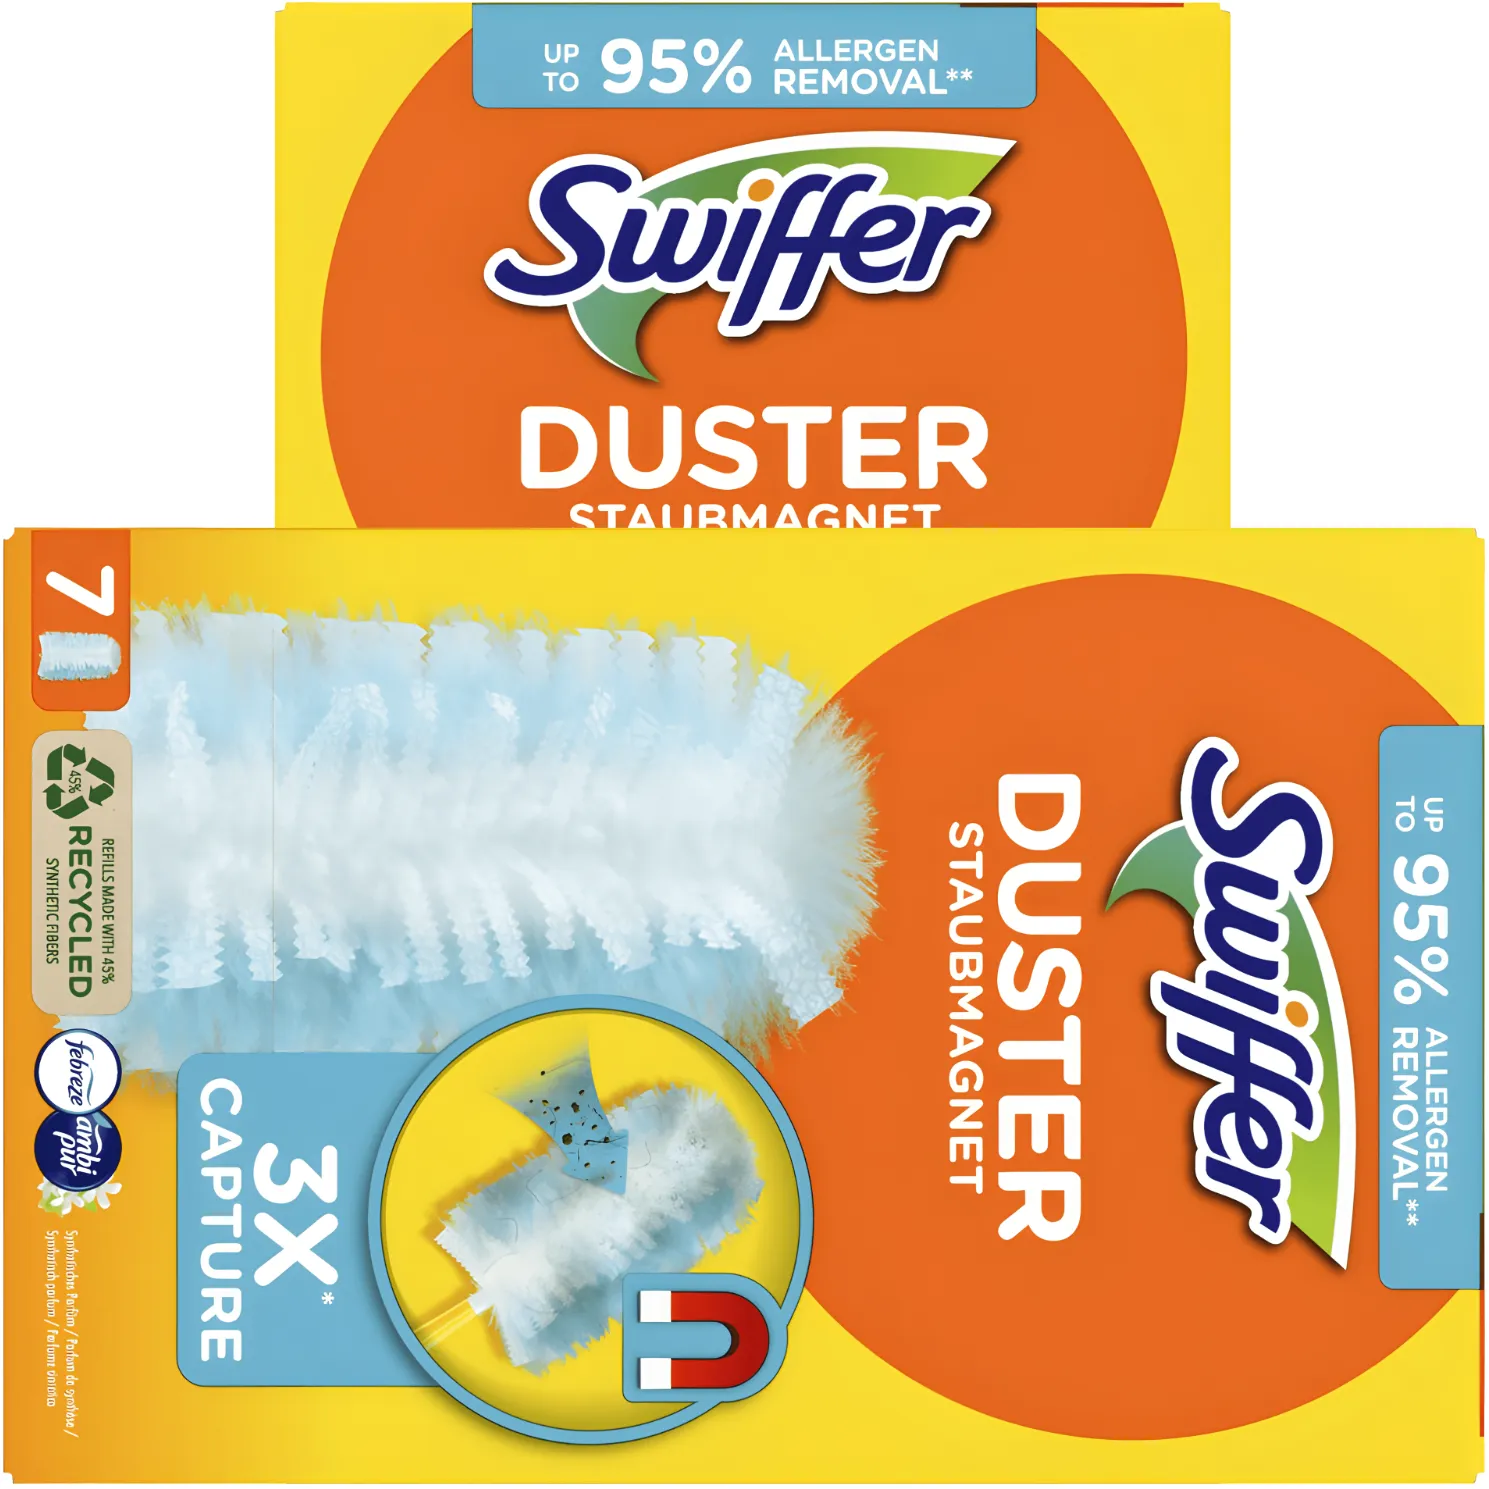 Free Swiffer Dusters At FreeOsk